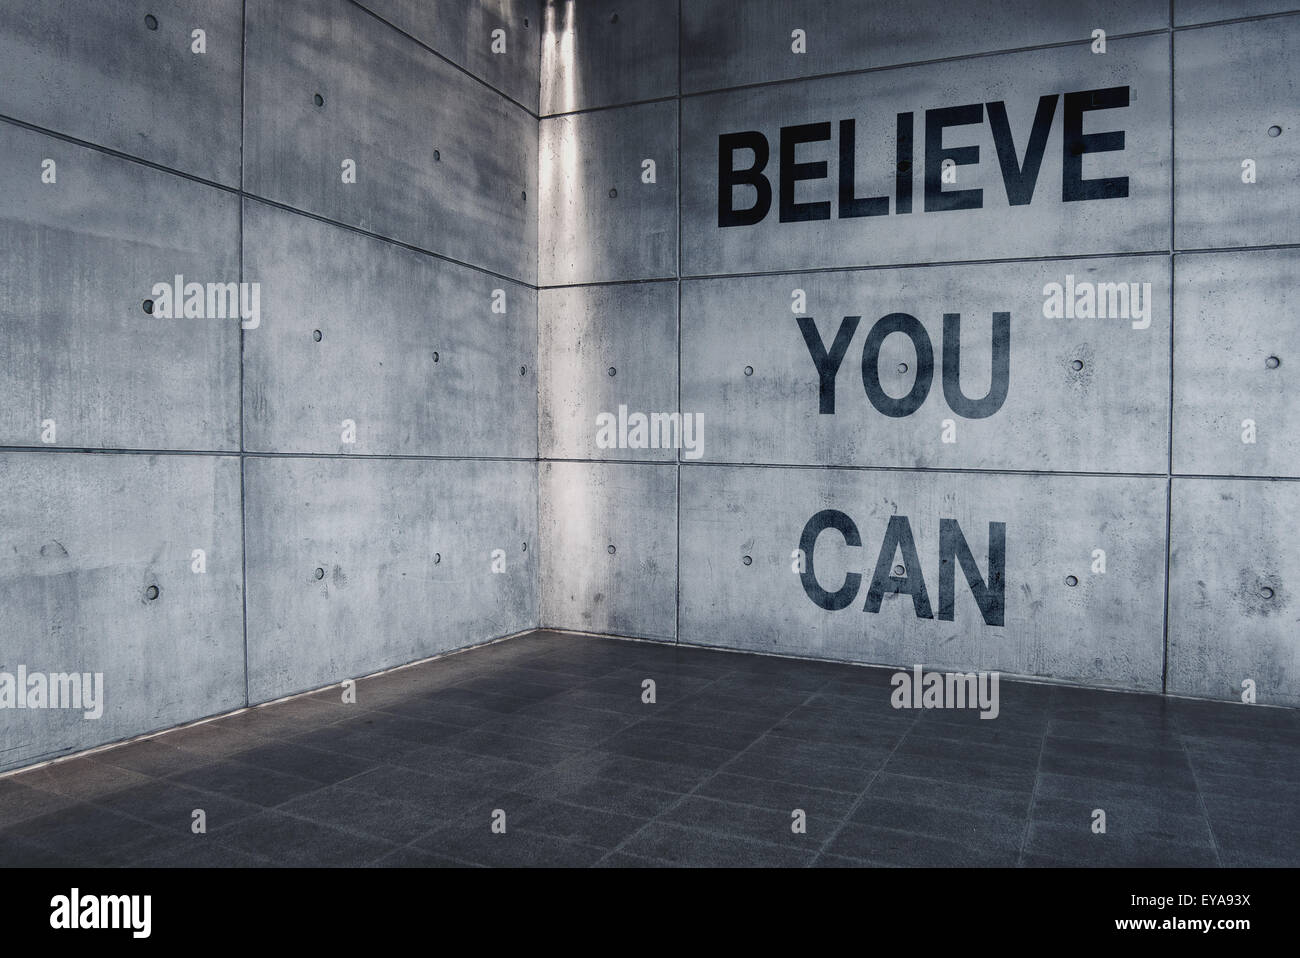 Believe You Can, Motivational Graffiti Message on Concrete Wall Stock Photo